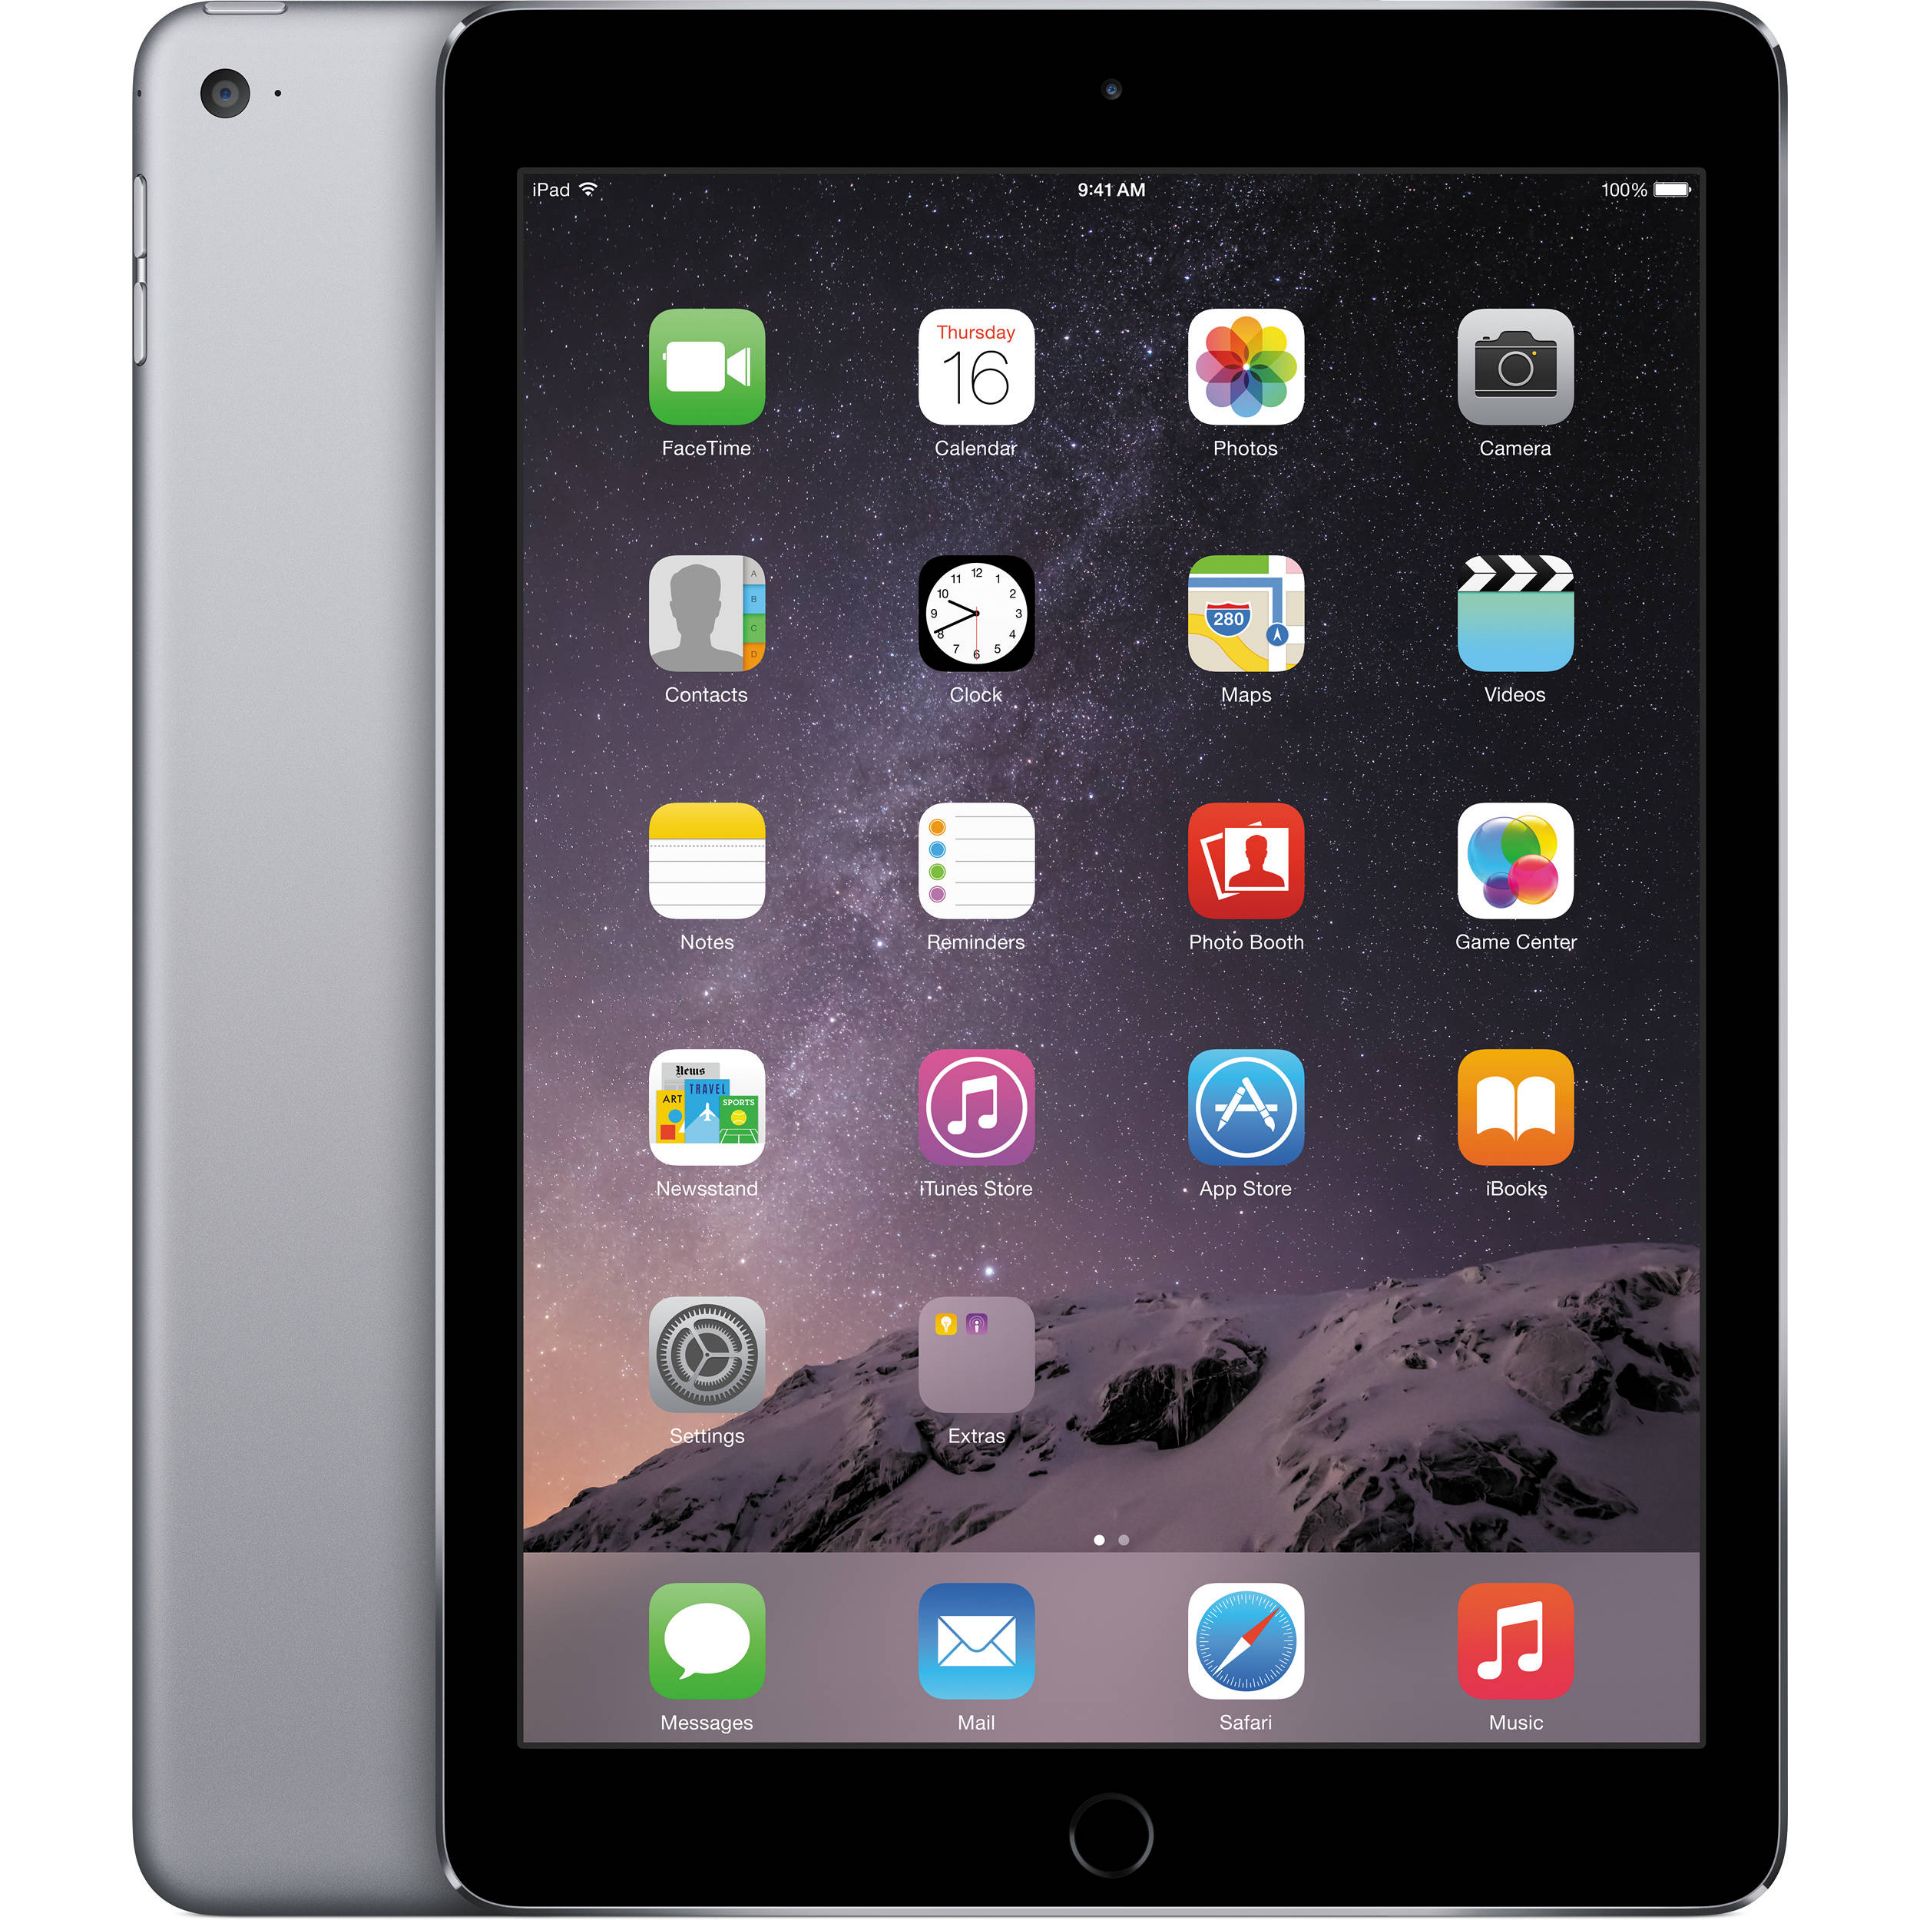 V Grade A IPad Air Wi-Fi 16GB Space Grey 9.7" In Apple Box With Accessories